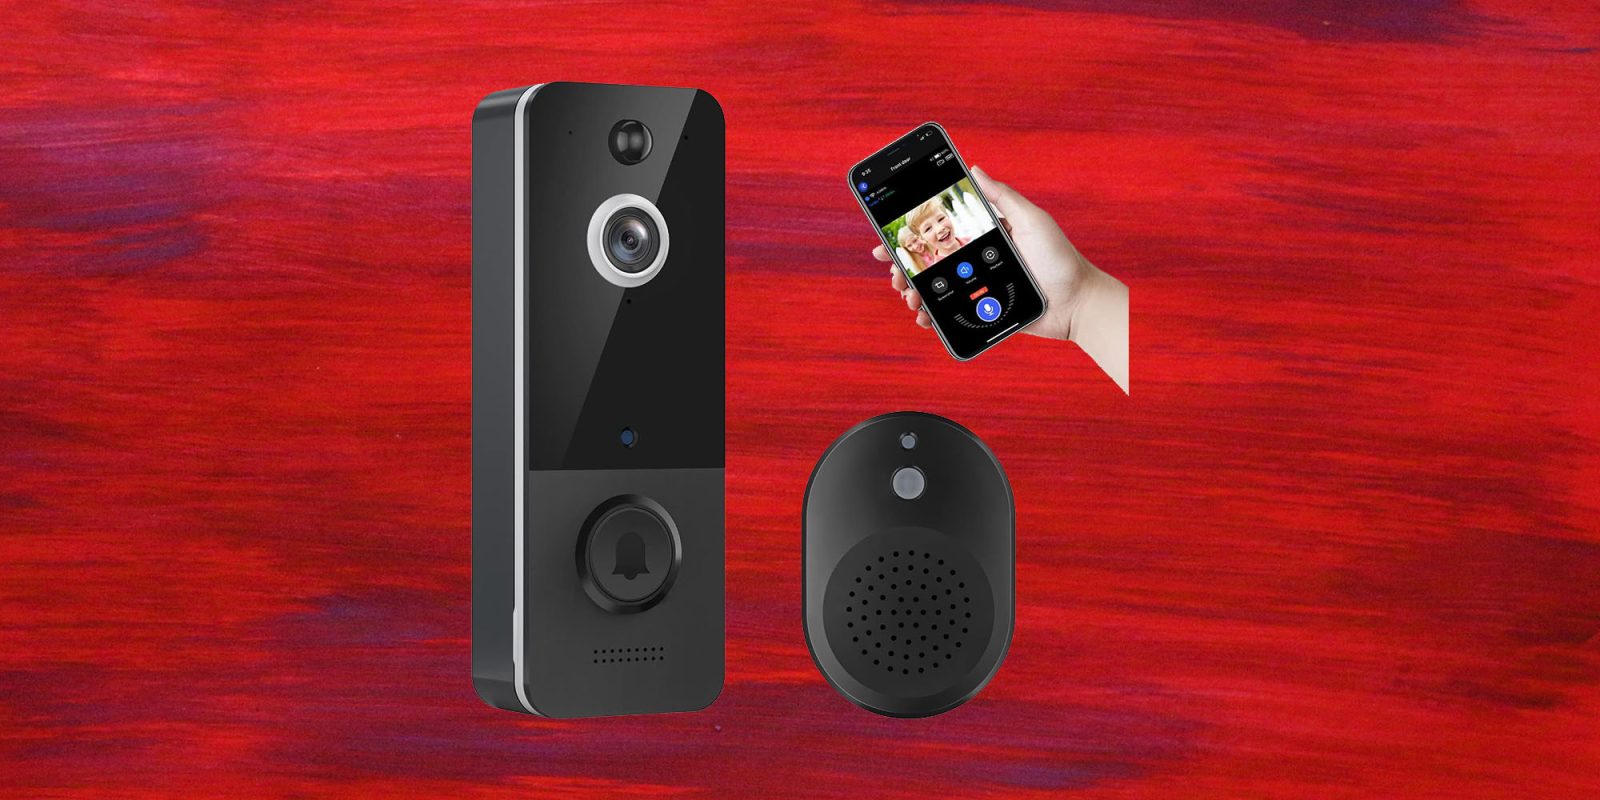 s Choice video doorbells may allow anyone to spy on you